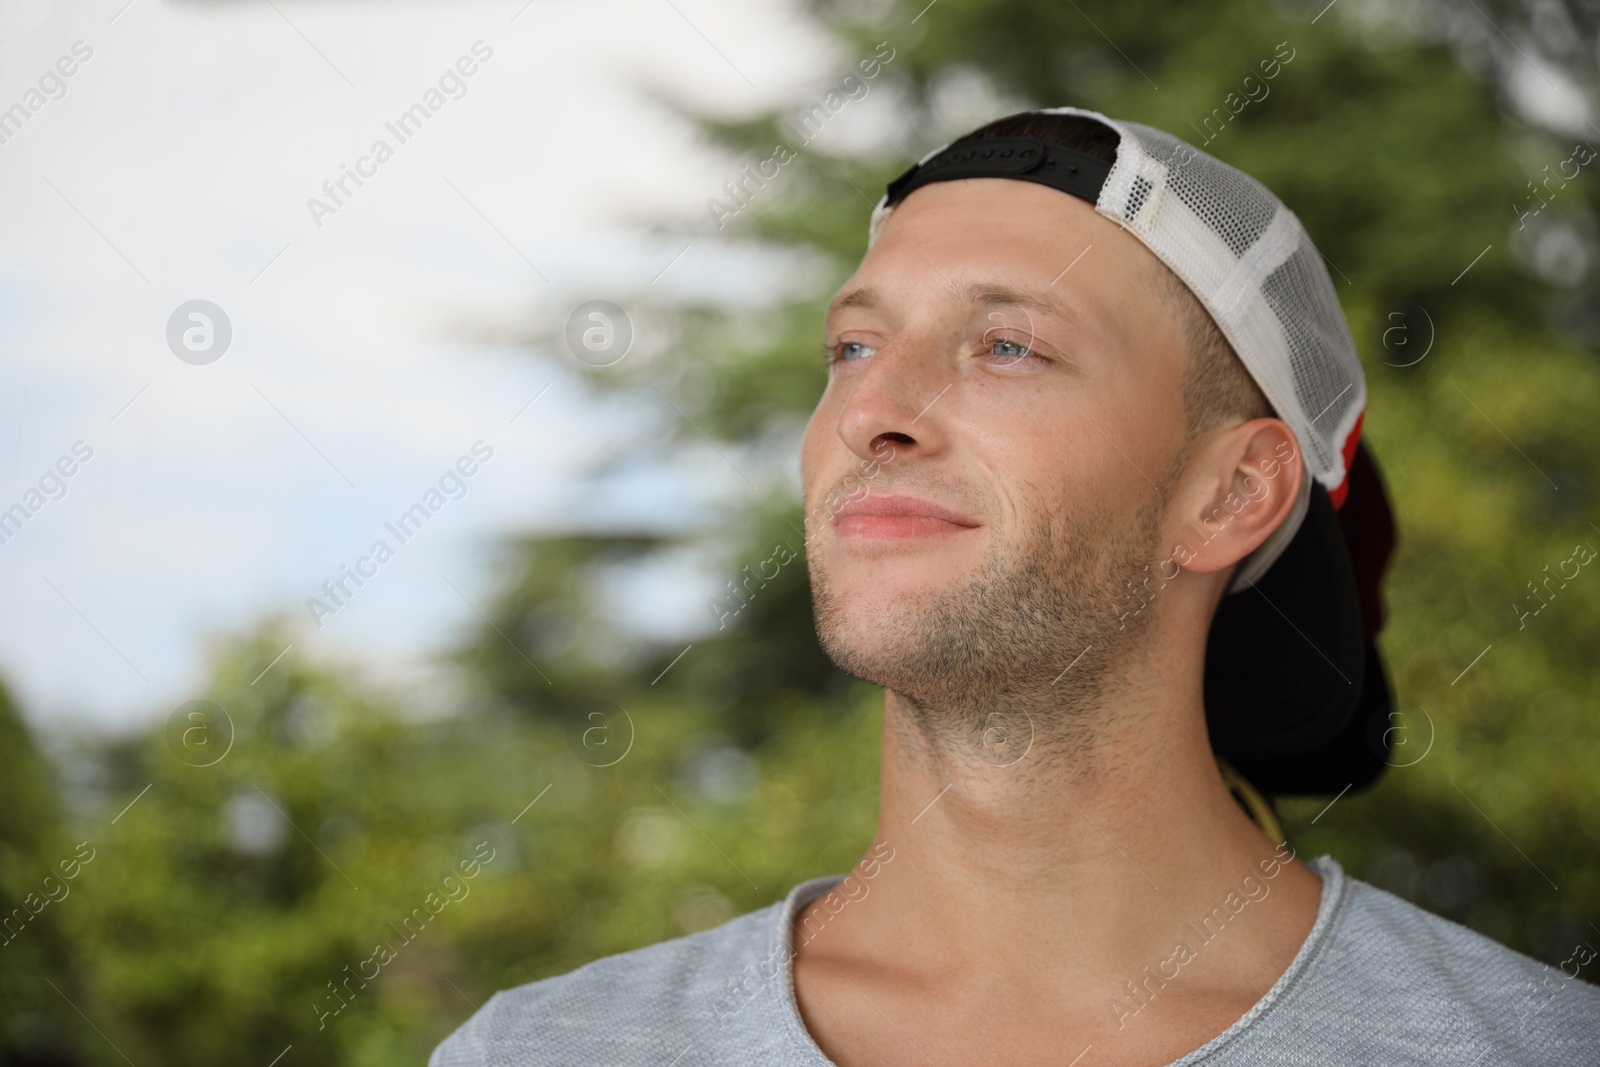 Photo of Handsome young man in stylish cap near reflection surface outdoors, space for text